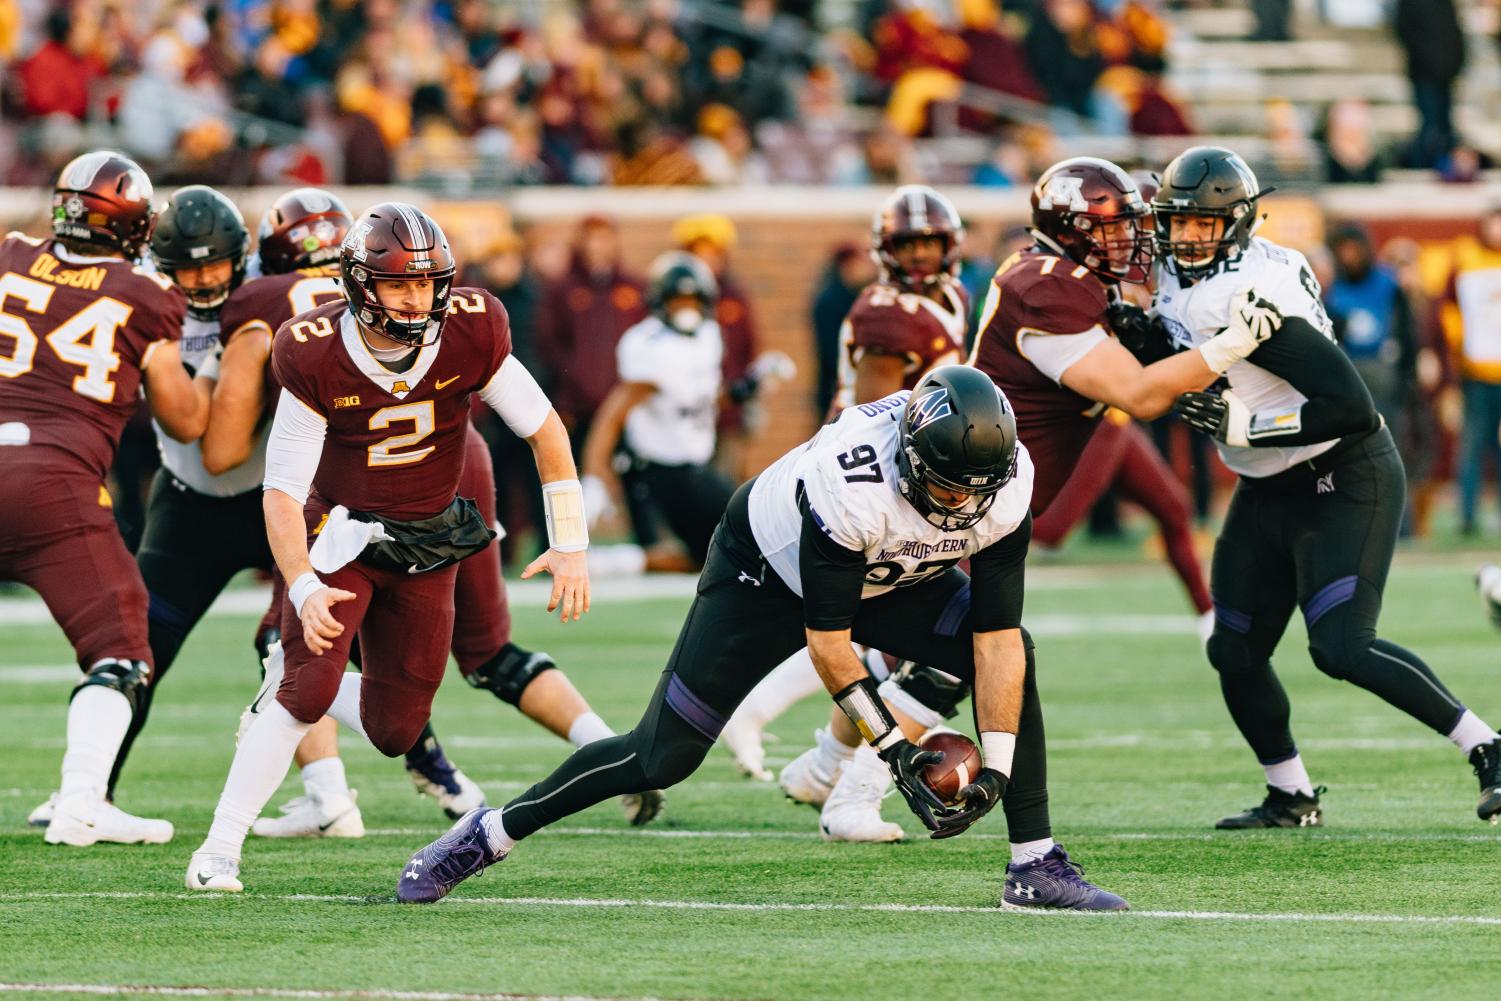 Joe+Gaziano+recovers+a+fumble.+Northwesterns+defense+came+up+huge+in+a+win+at+Minnesota.